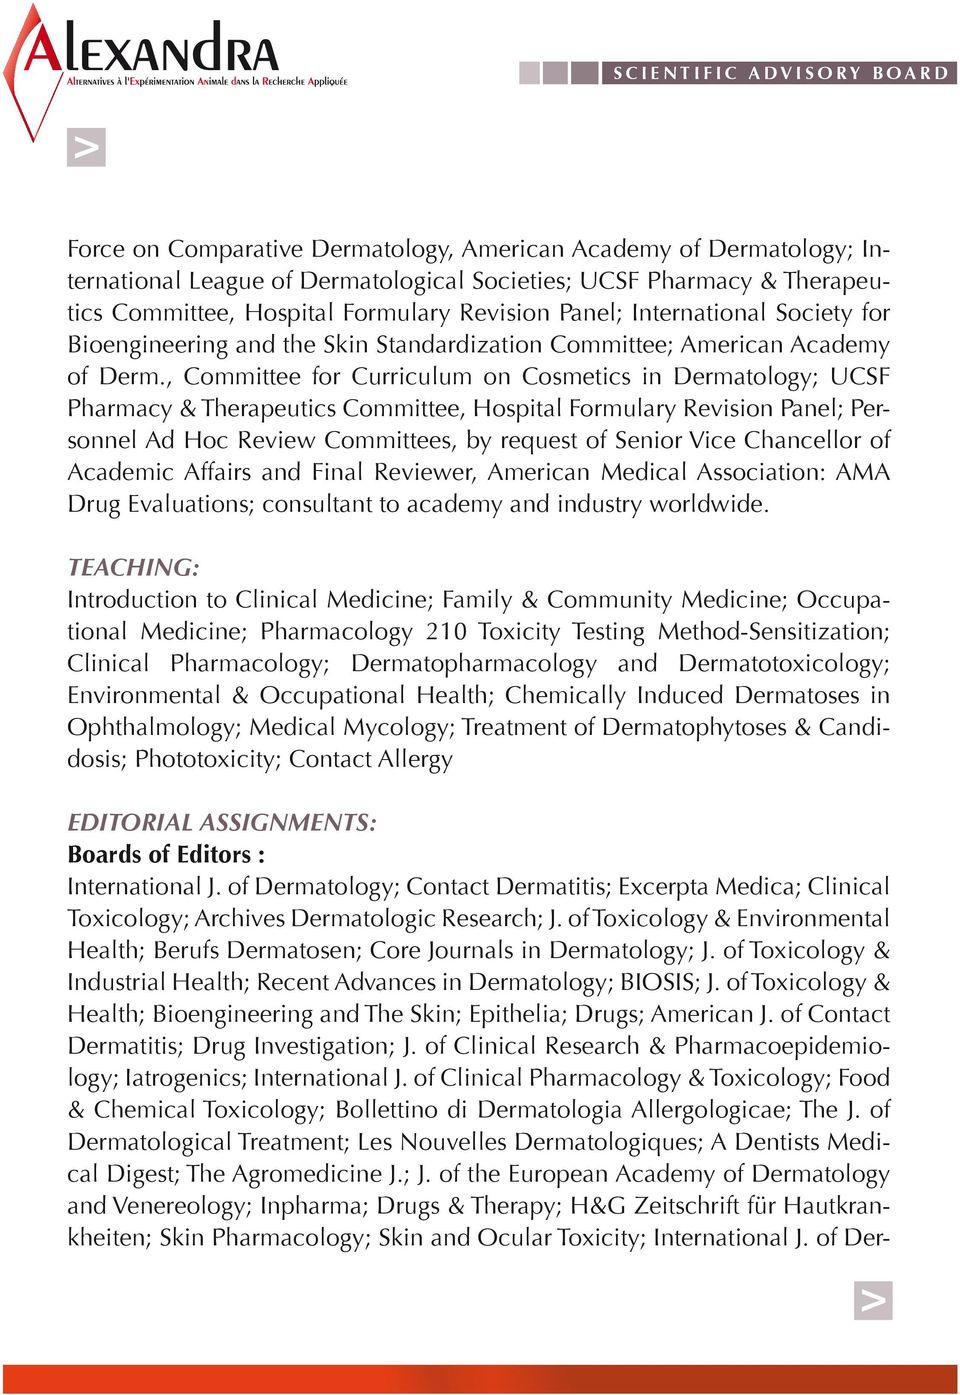 , Committee for Curriculum on Cosmetics in Dermatology; UCSF Pharmacy & Therapeutics Committee, Hospital Formulary Revision Panel; Personnel Ad Hoc Review Committees, by request of Senior Vice